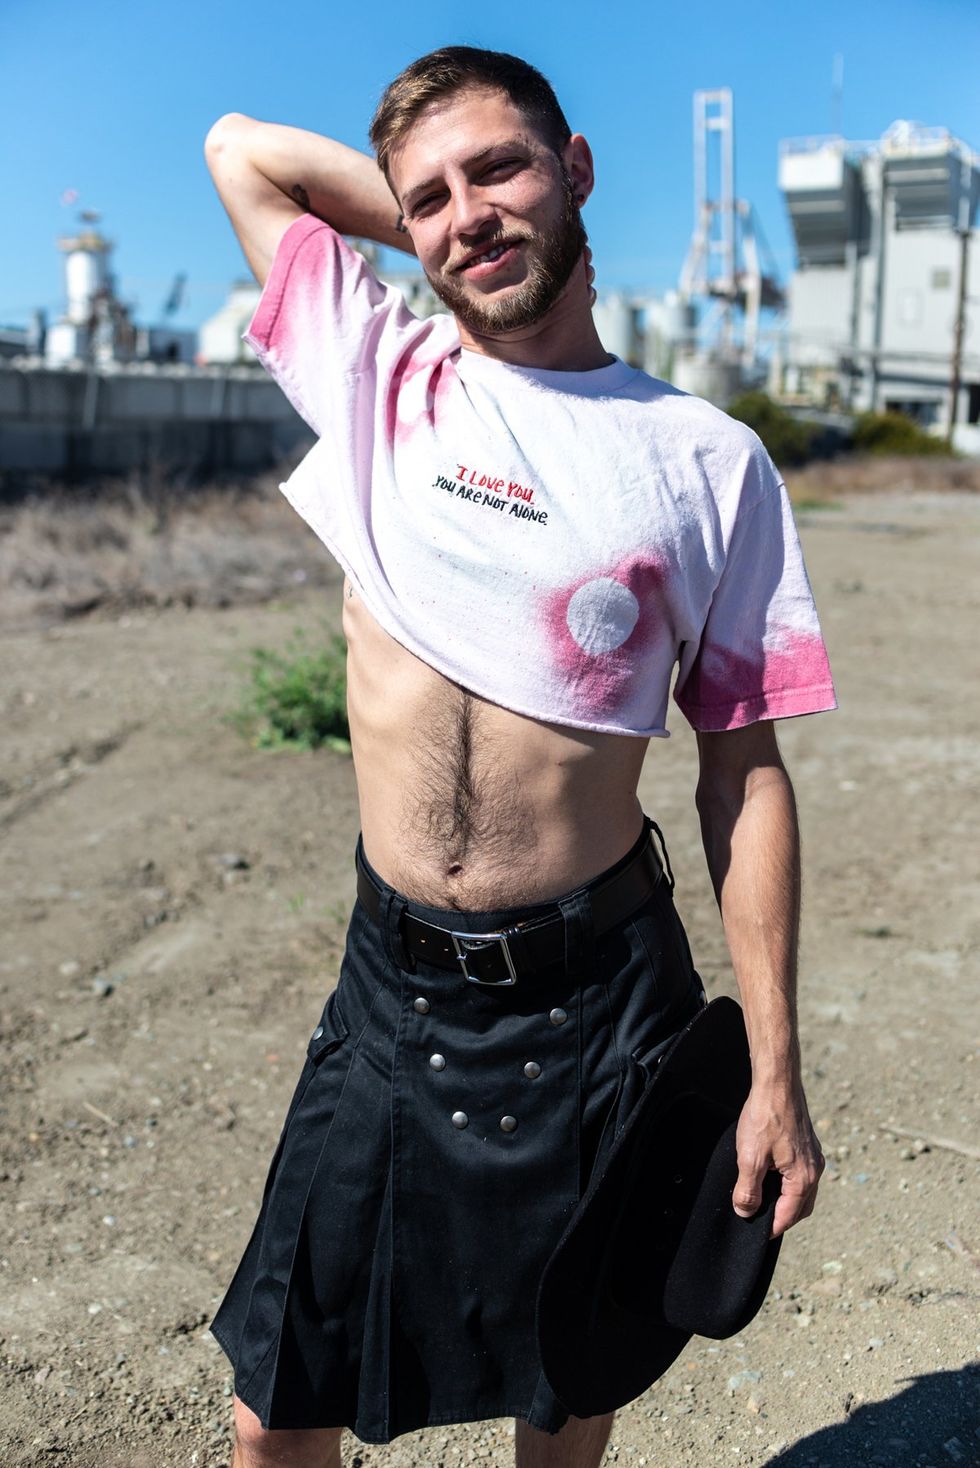 gay man in cut off t-shirt and black kilt stands outside in industrial setting